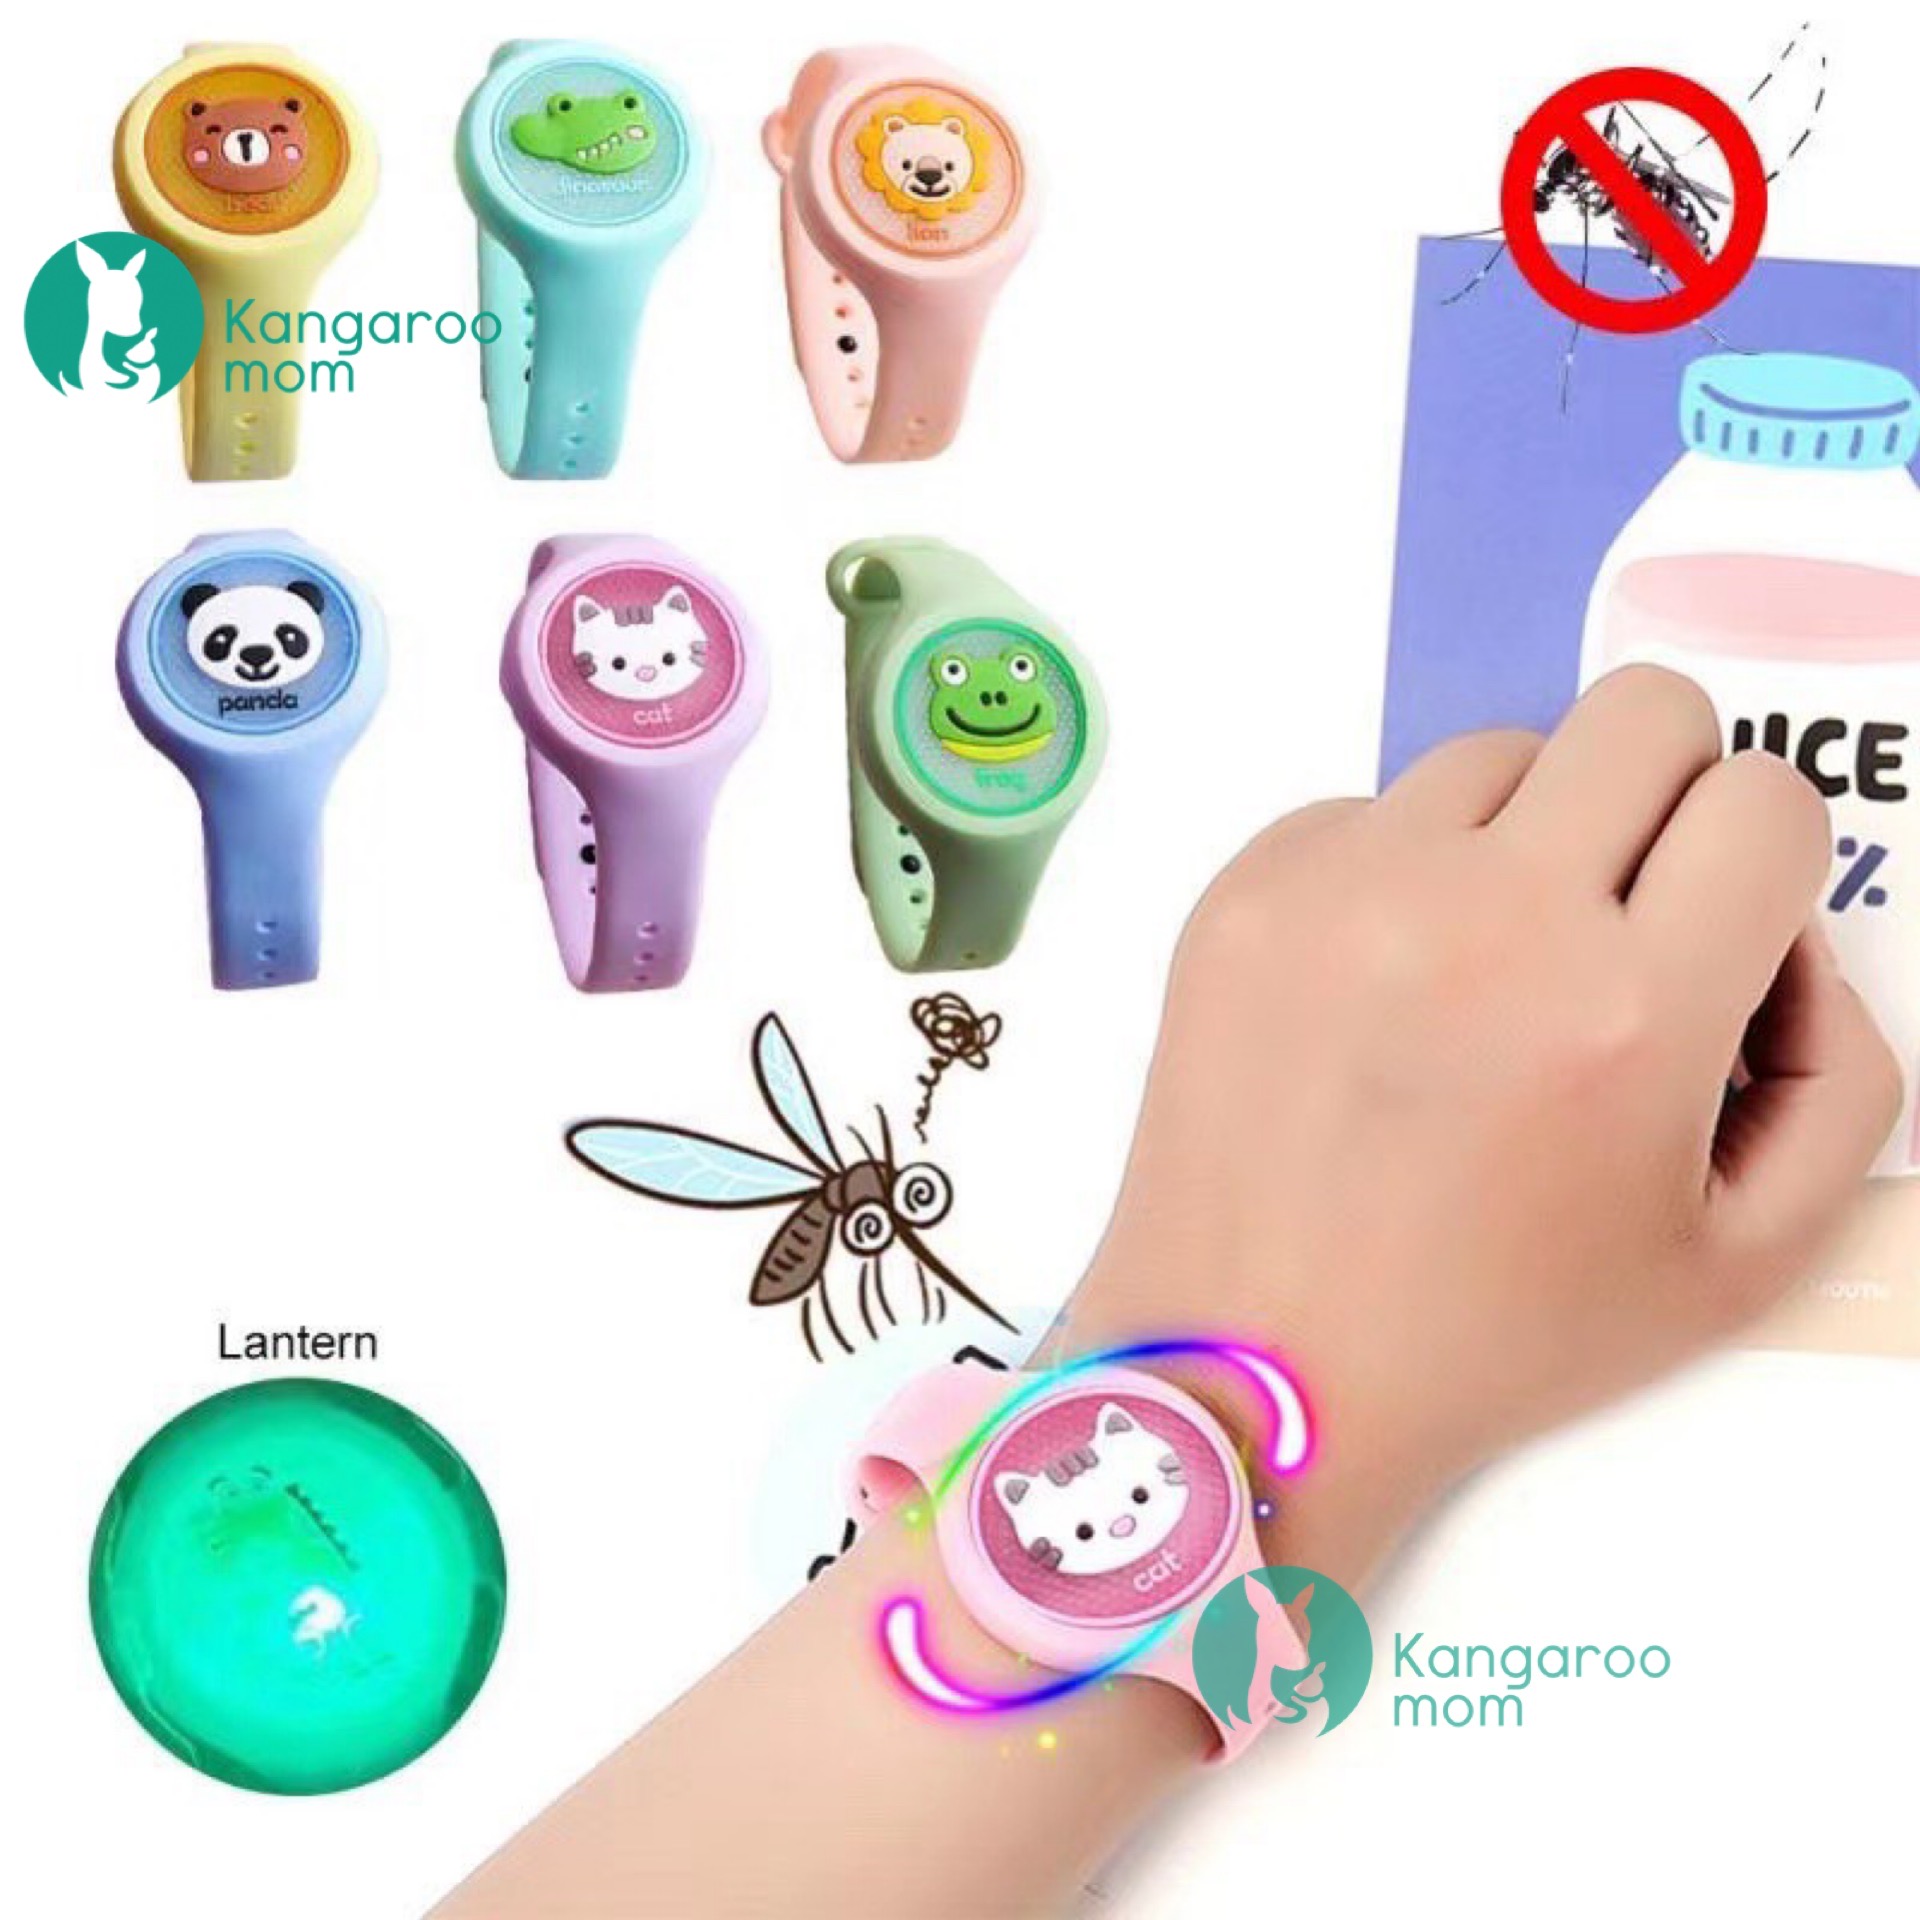 Baby Anti Mosquito Repellent Bracelet Anti Mosquito Capsule Pest Insect  Bugs Control Mosquito Repellent Killer Wristband for Kid  Price history   Review  AliExpress Seller  HomeDesigner Store  Alitoolsio